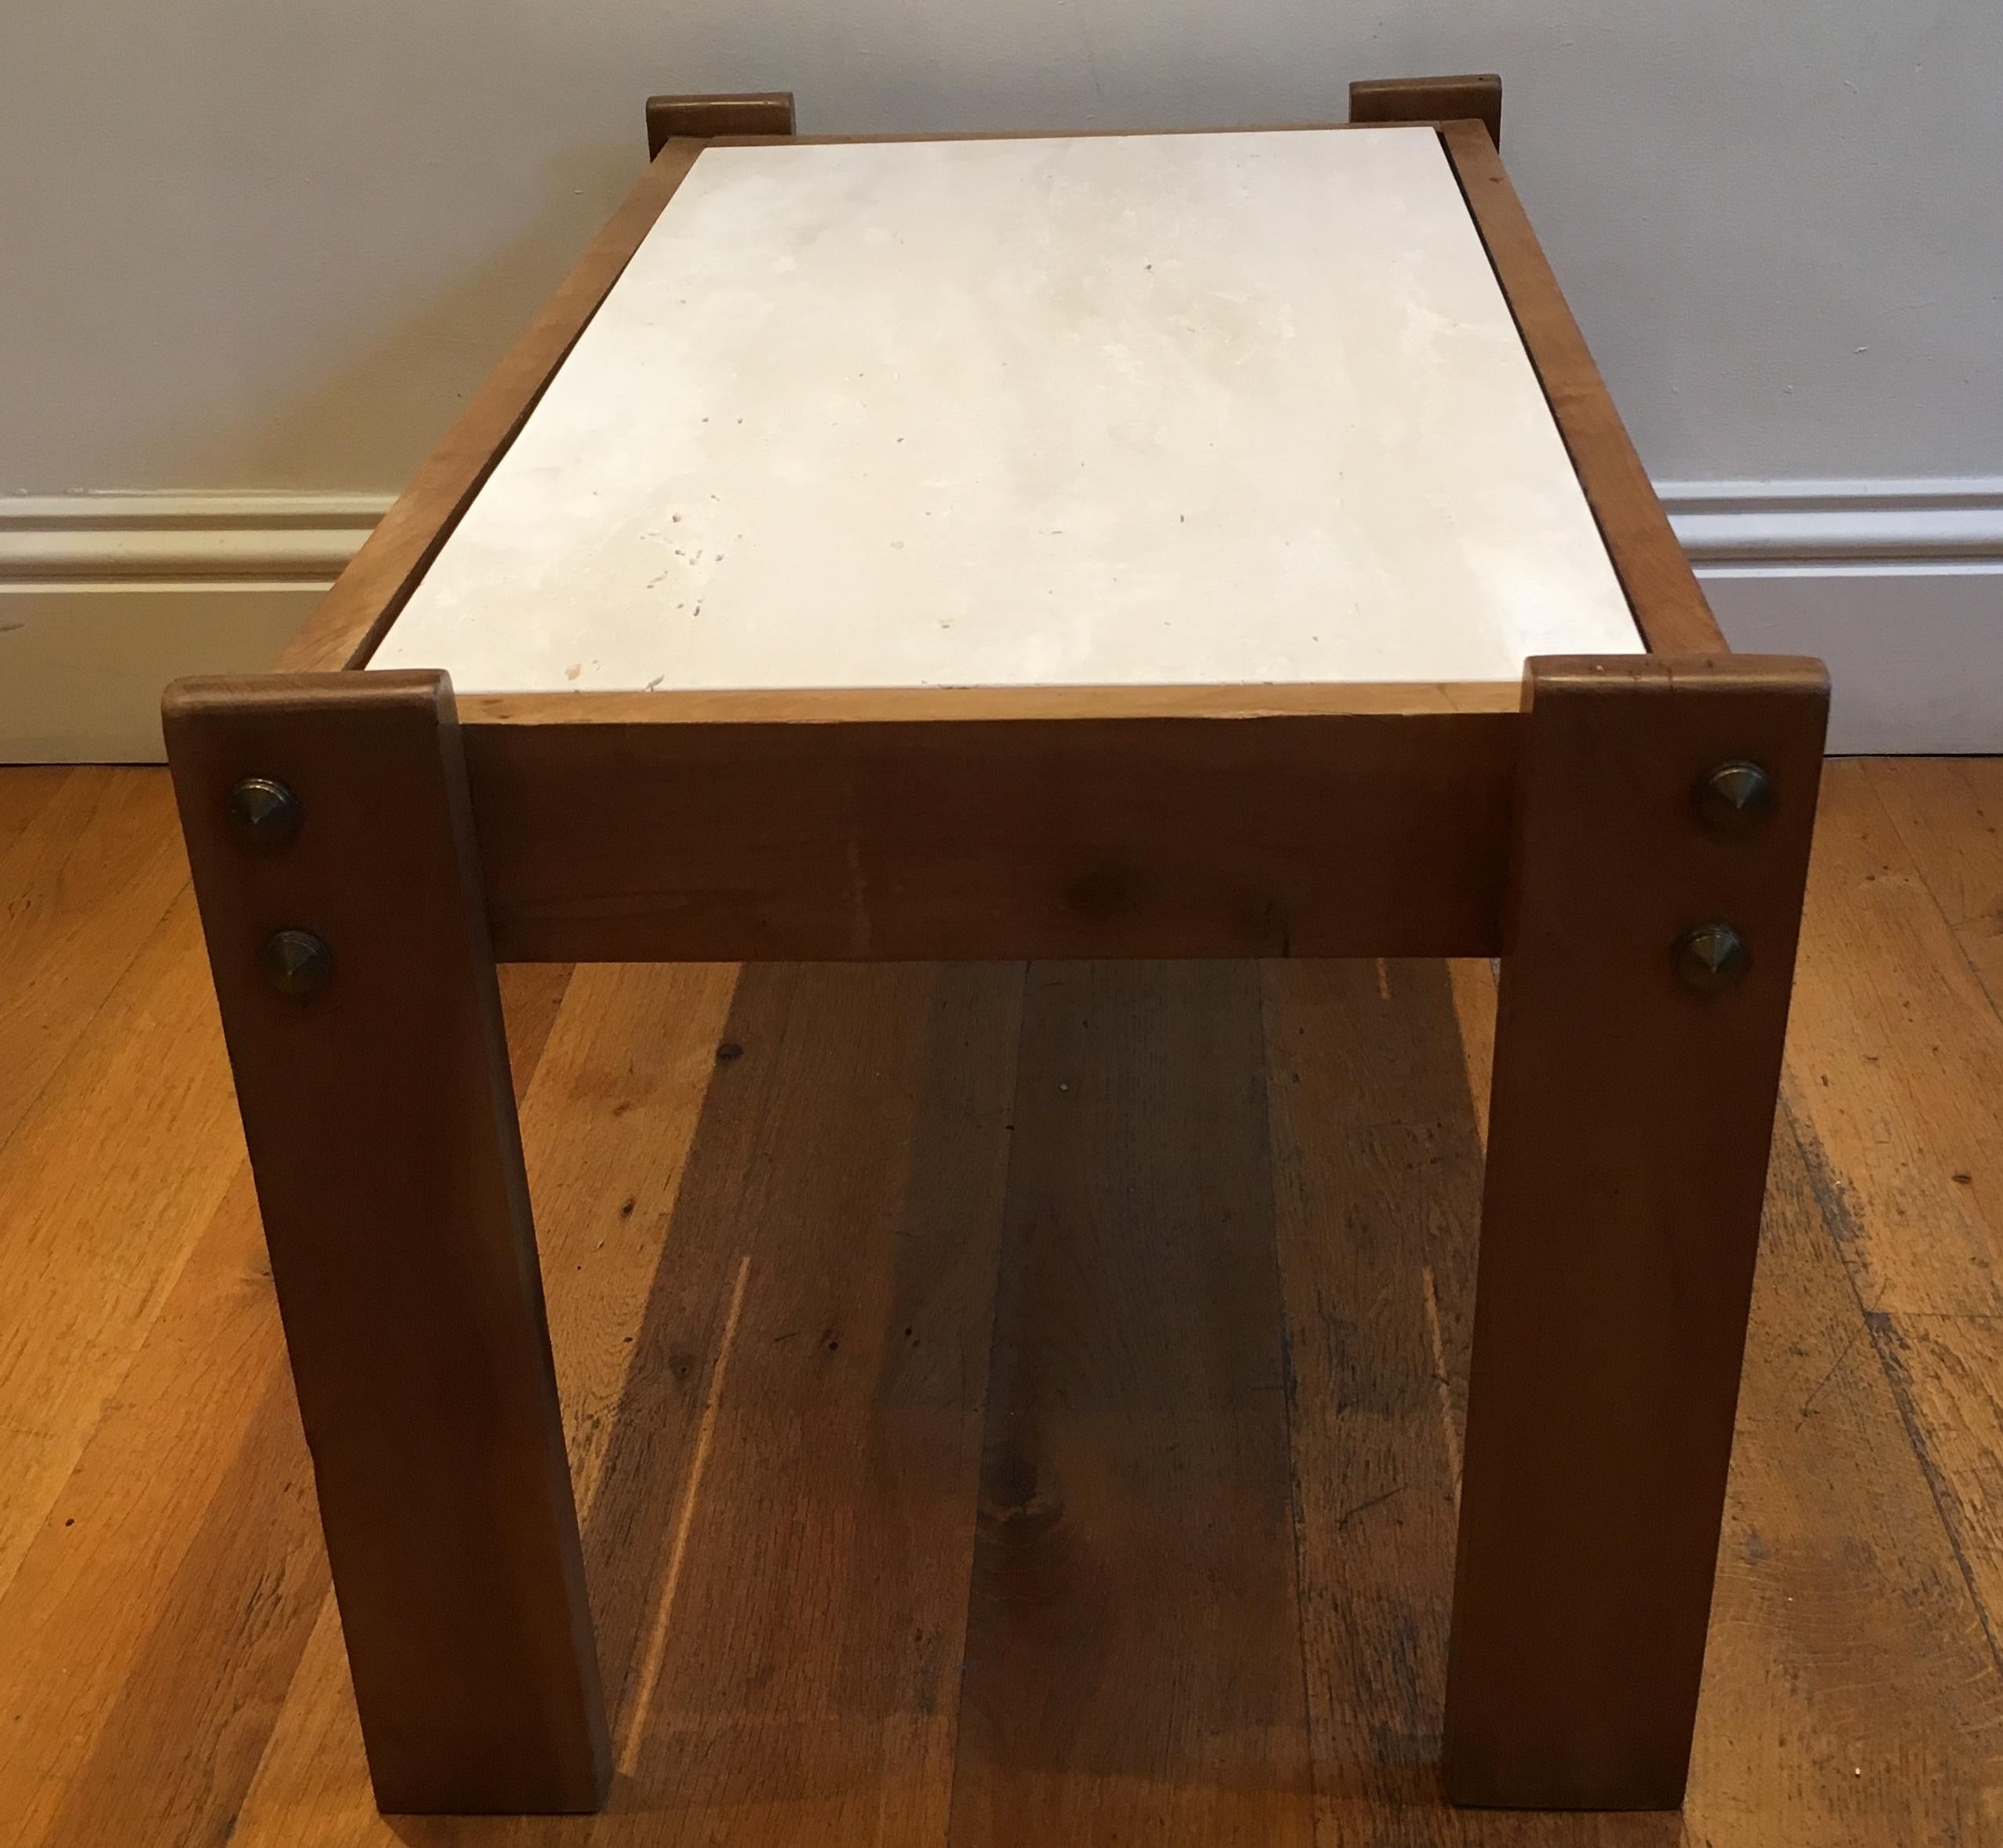 20th Century French Travertine and Wood Coffee Table